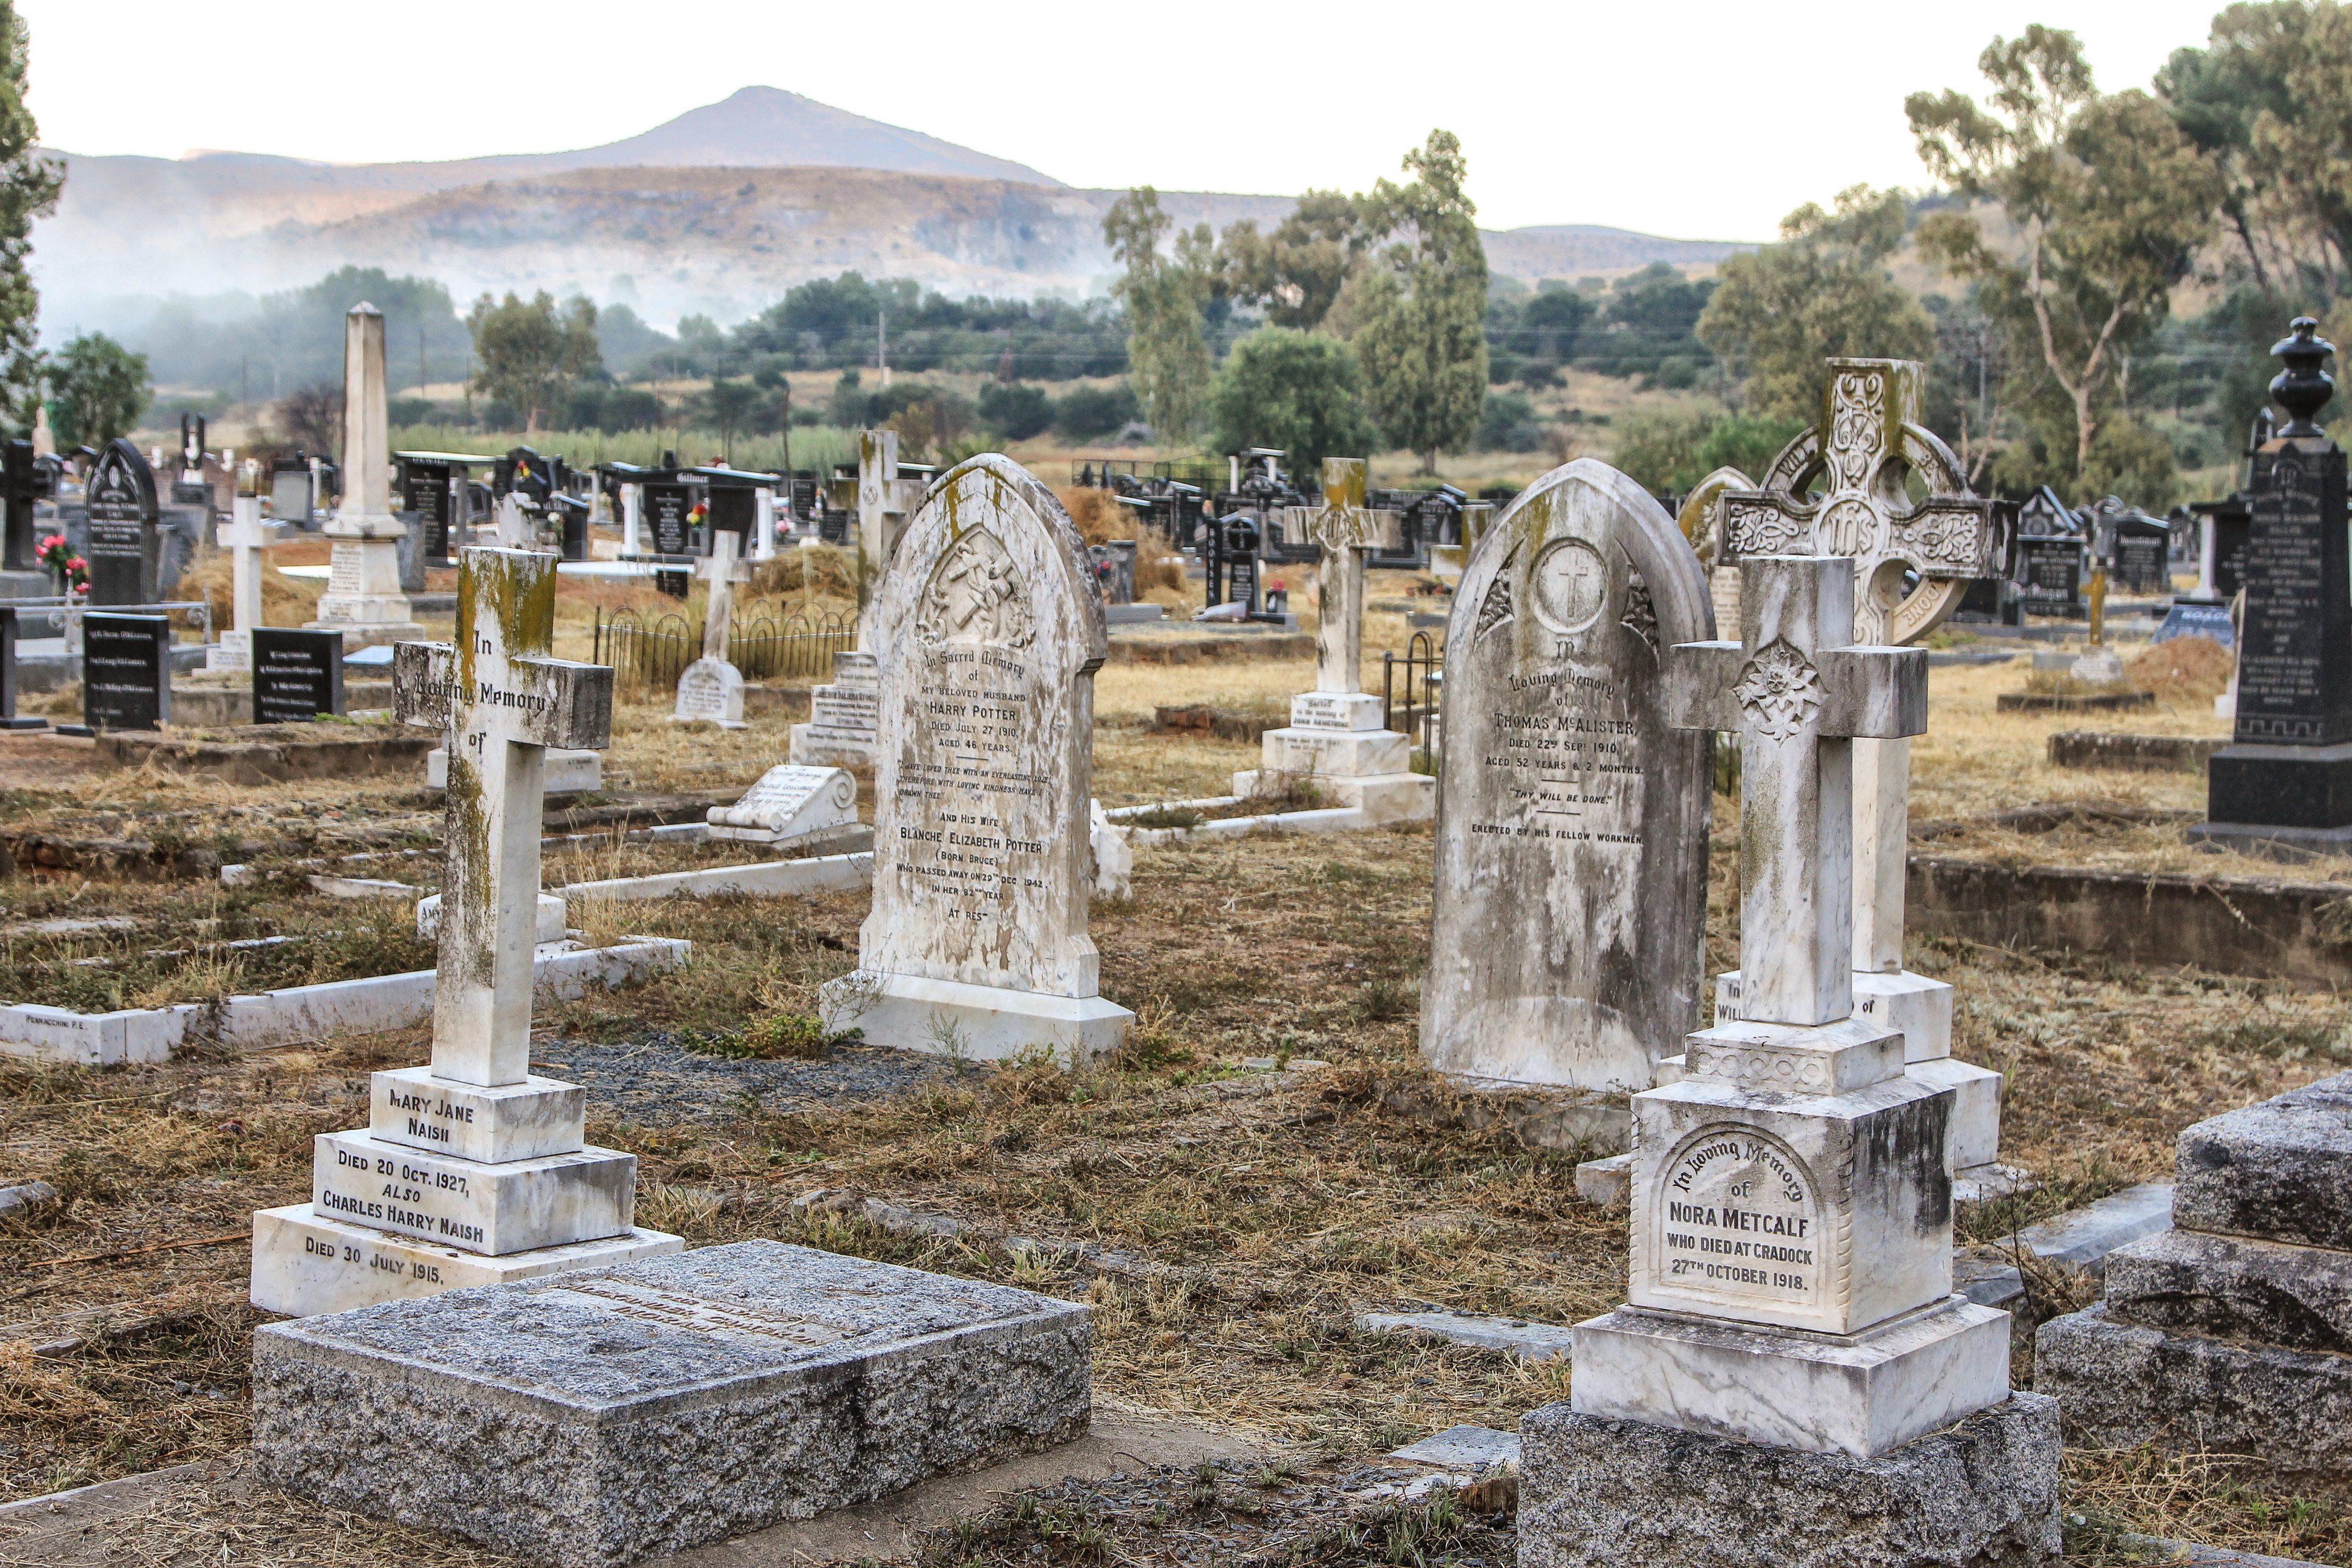 The main Cradock cemetery on a misty autumn morning – full of atmosphere and legend. Image: Chris Marais